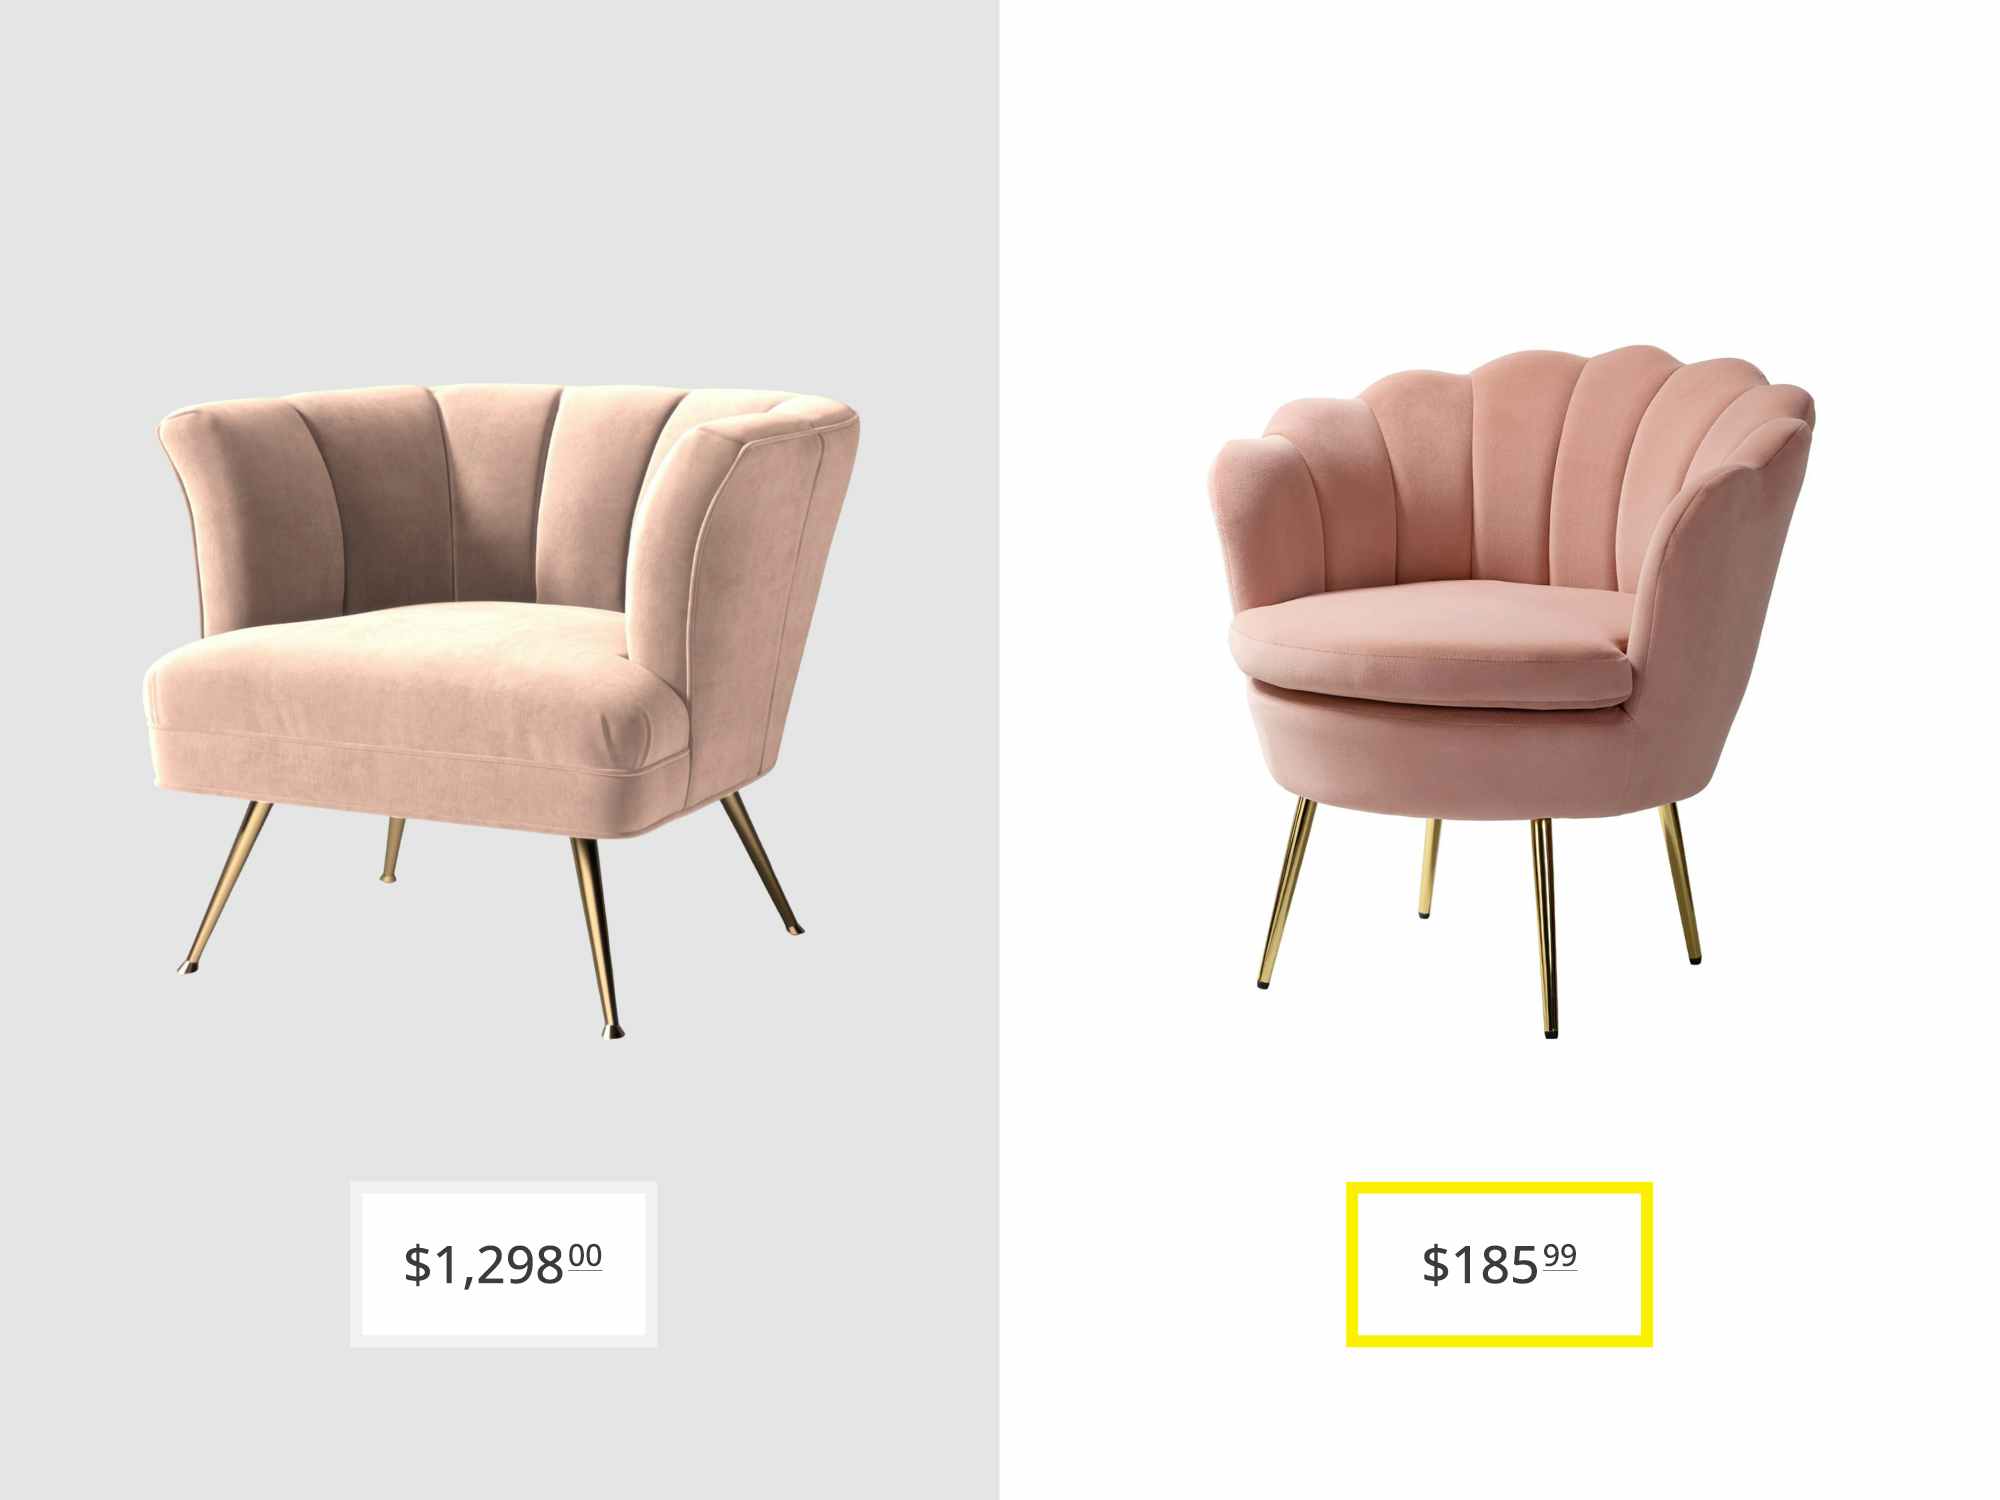 ANTHROPOLOGIE FURNITURE DUPES  Anthropologie Furniture Lookalikes on